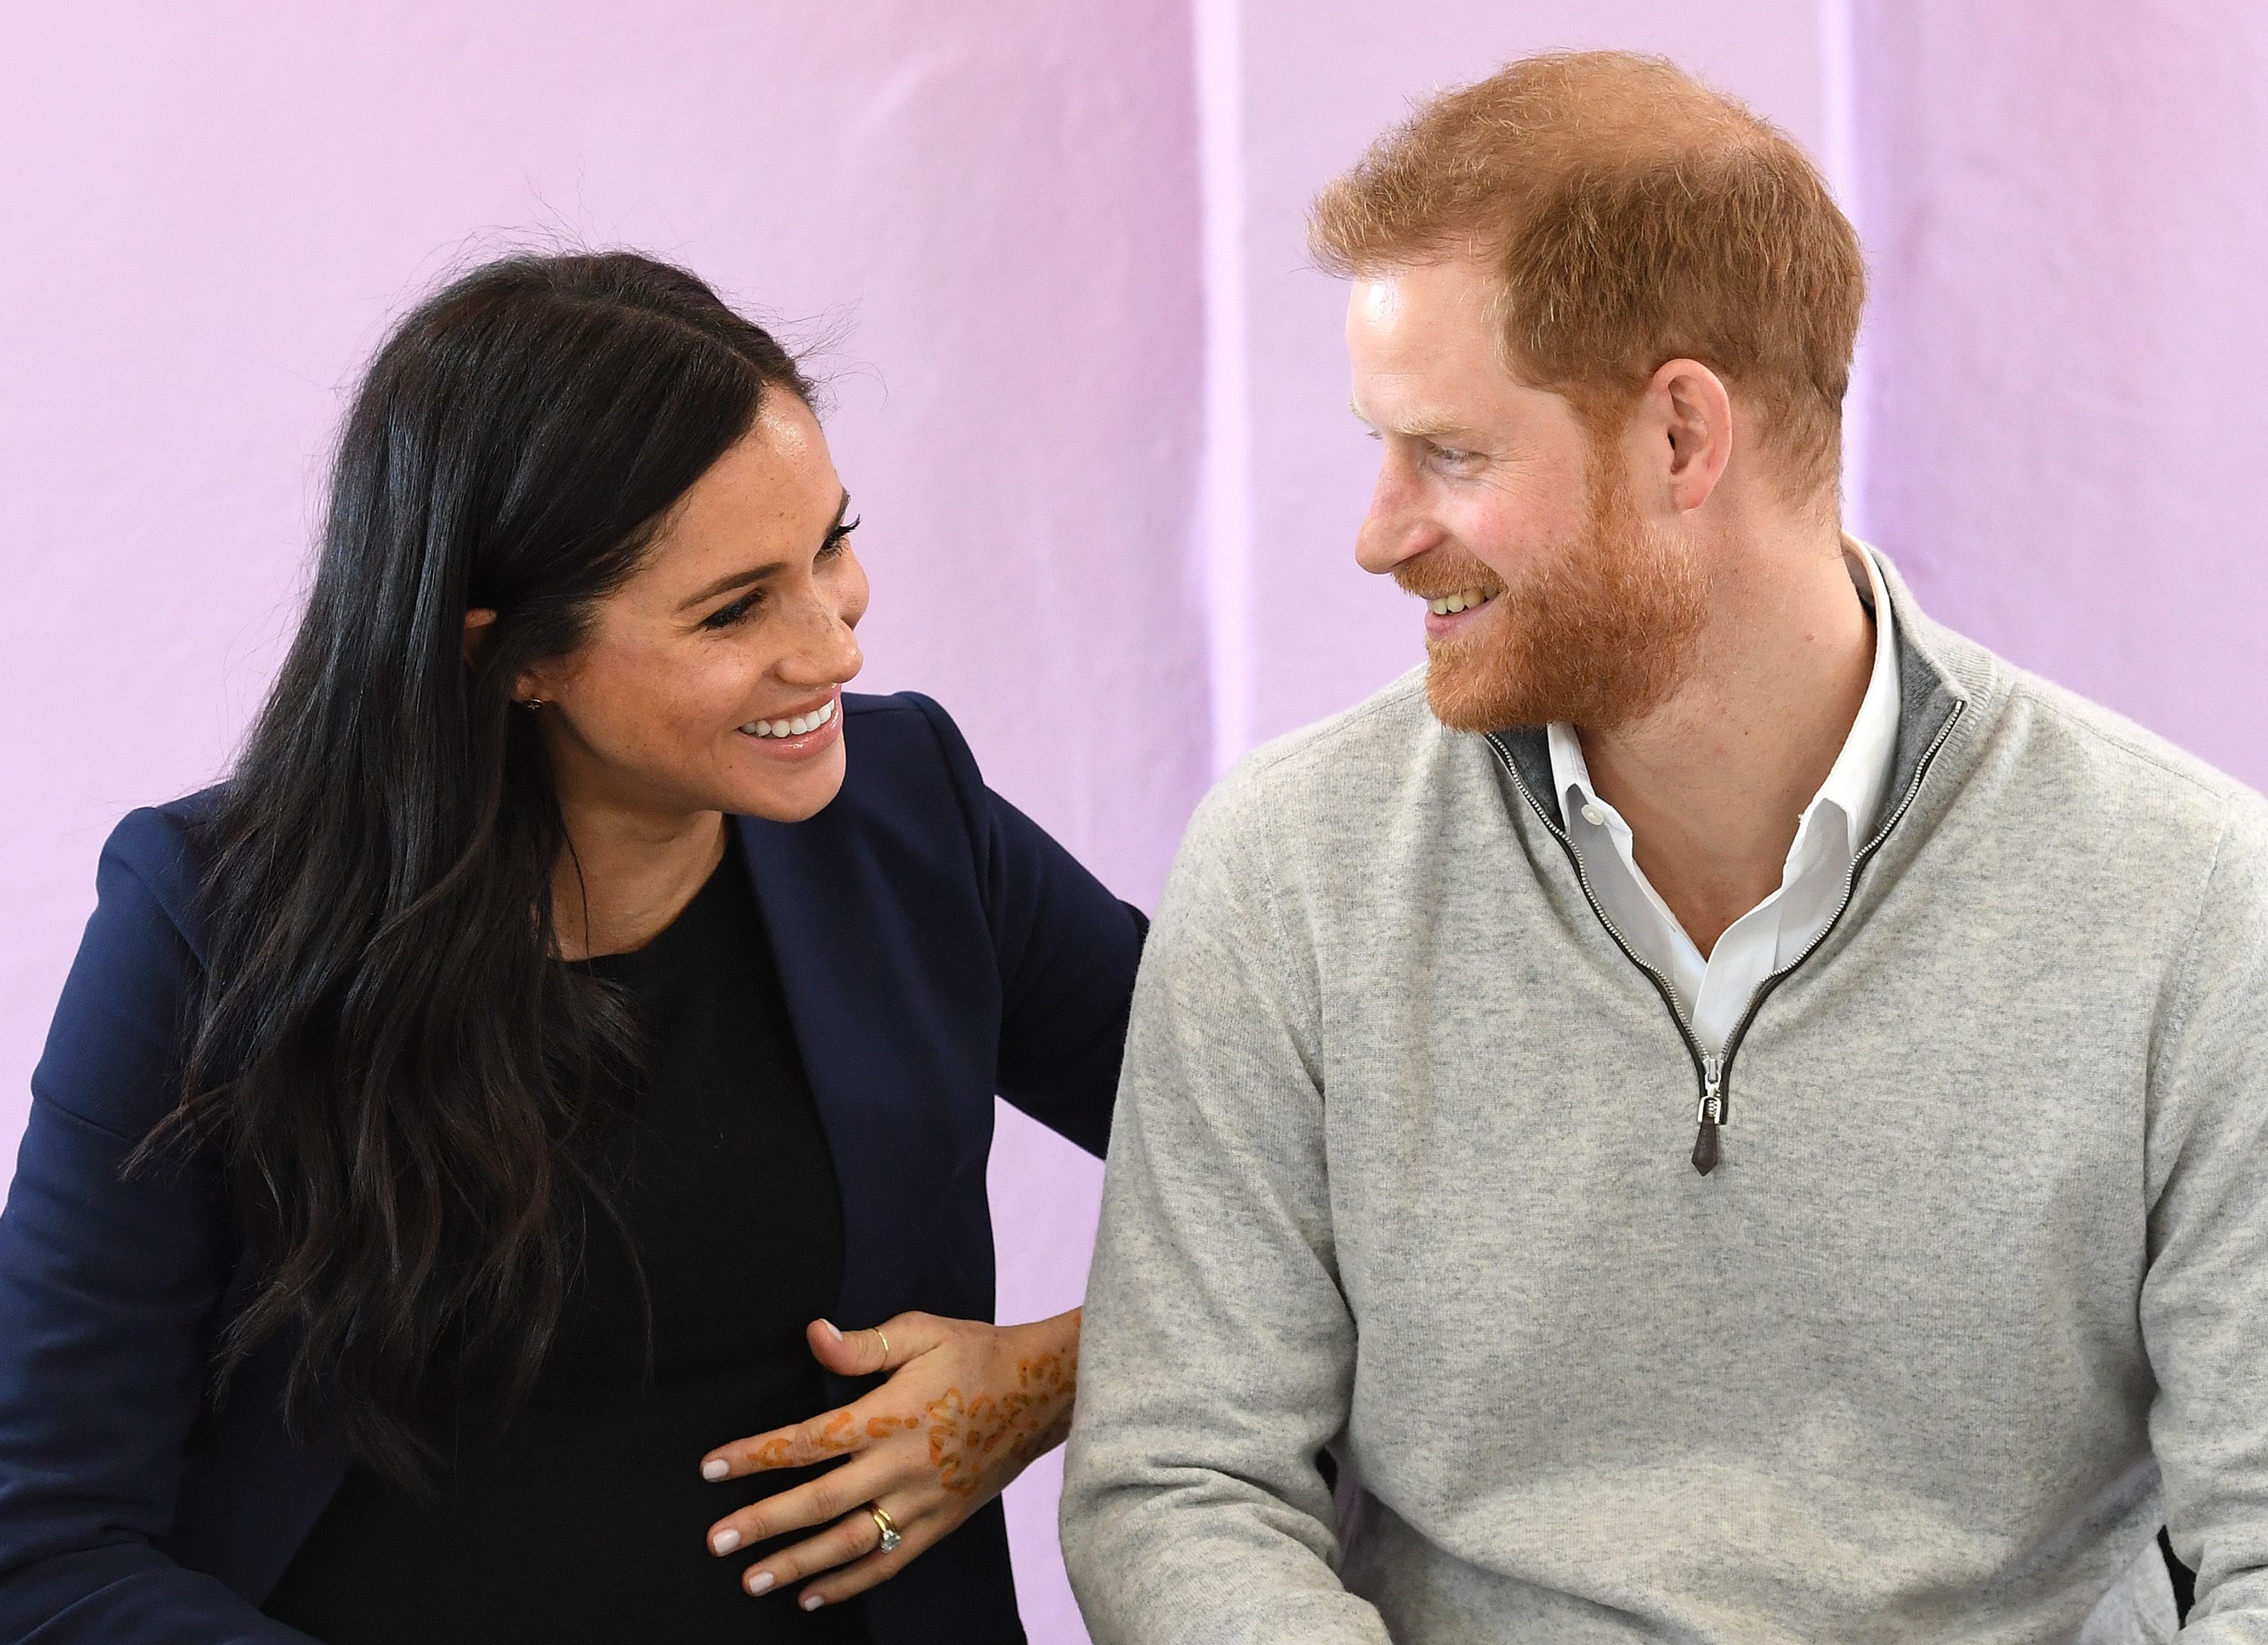 prince-harry-duke-of-sussex-and-meghan-duchess-of-sussex-news-photo-1131849609-1551118987.jpg